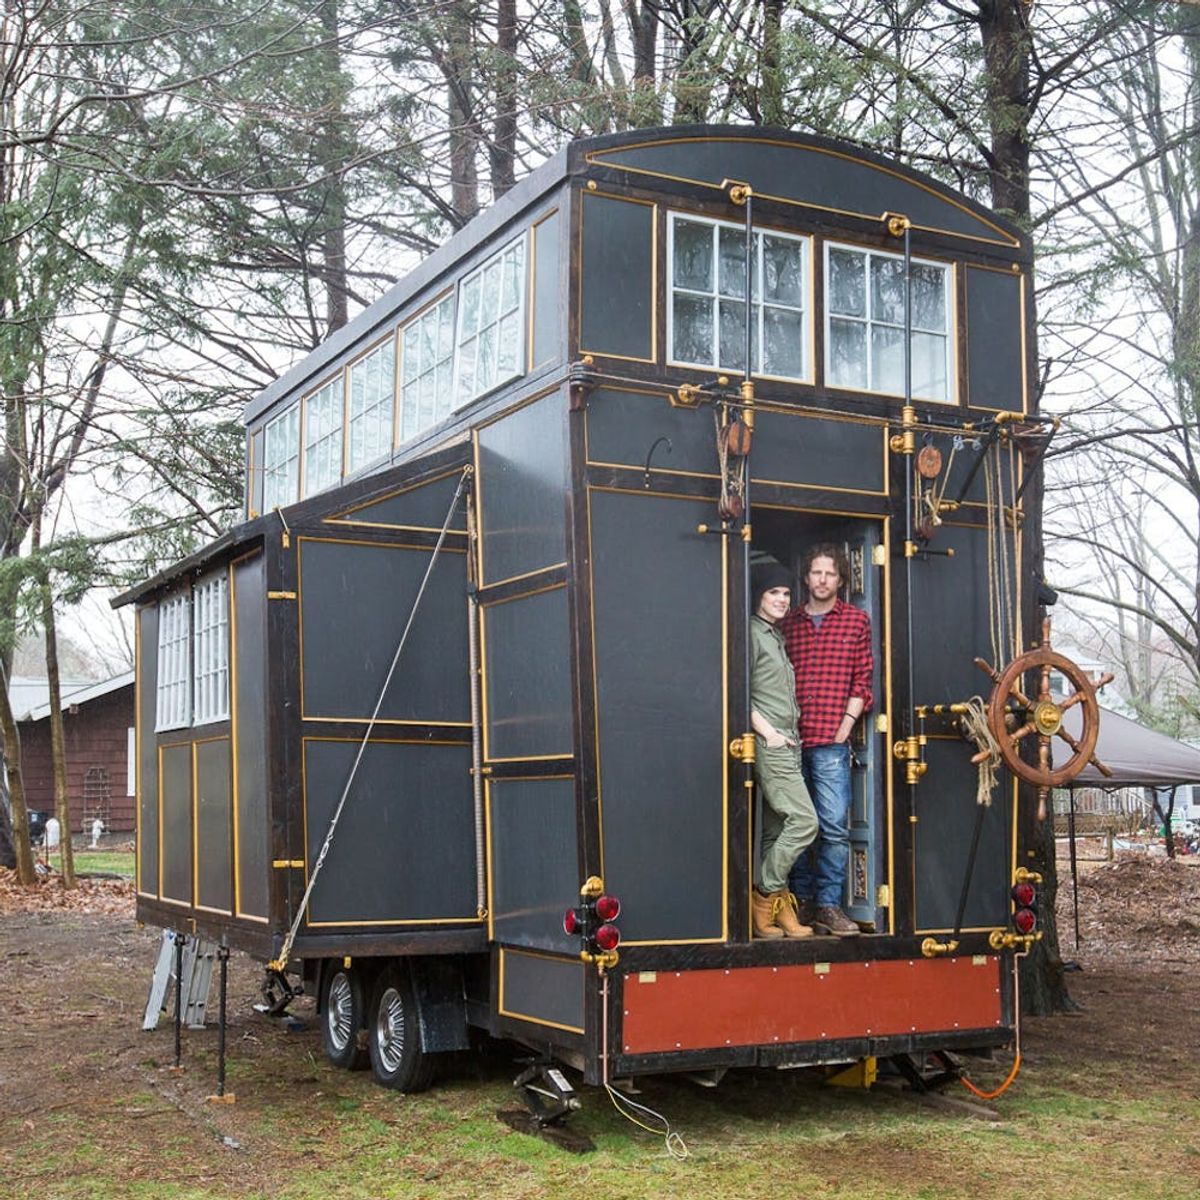 Tiny Spaces: A Tiny Home Built Out of Recycled Materials